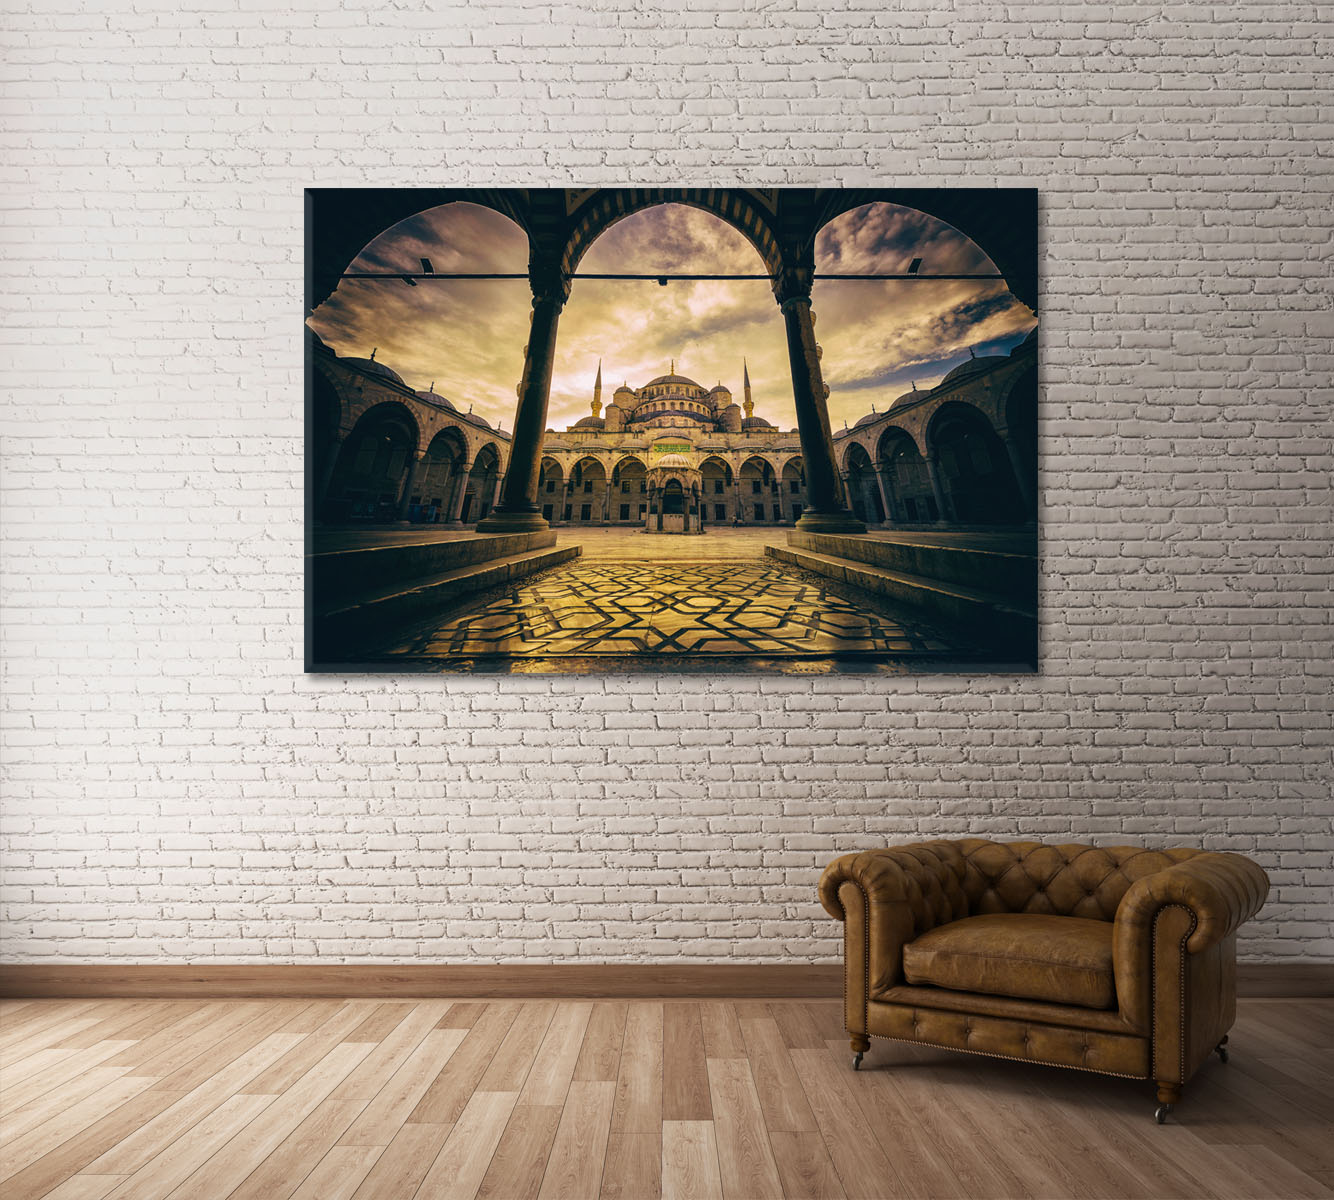 Blue Mosque (Sultan Ahmed Mosque) Istanbul Turkey Canvas Print ArtLexy 1 Panel 24"x16" inches 